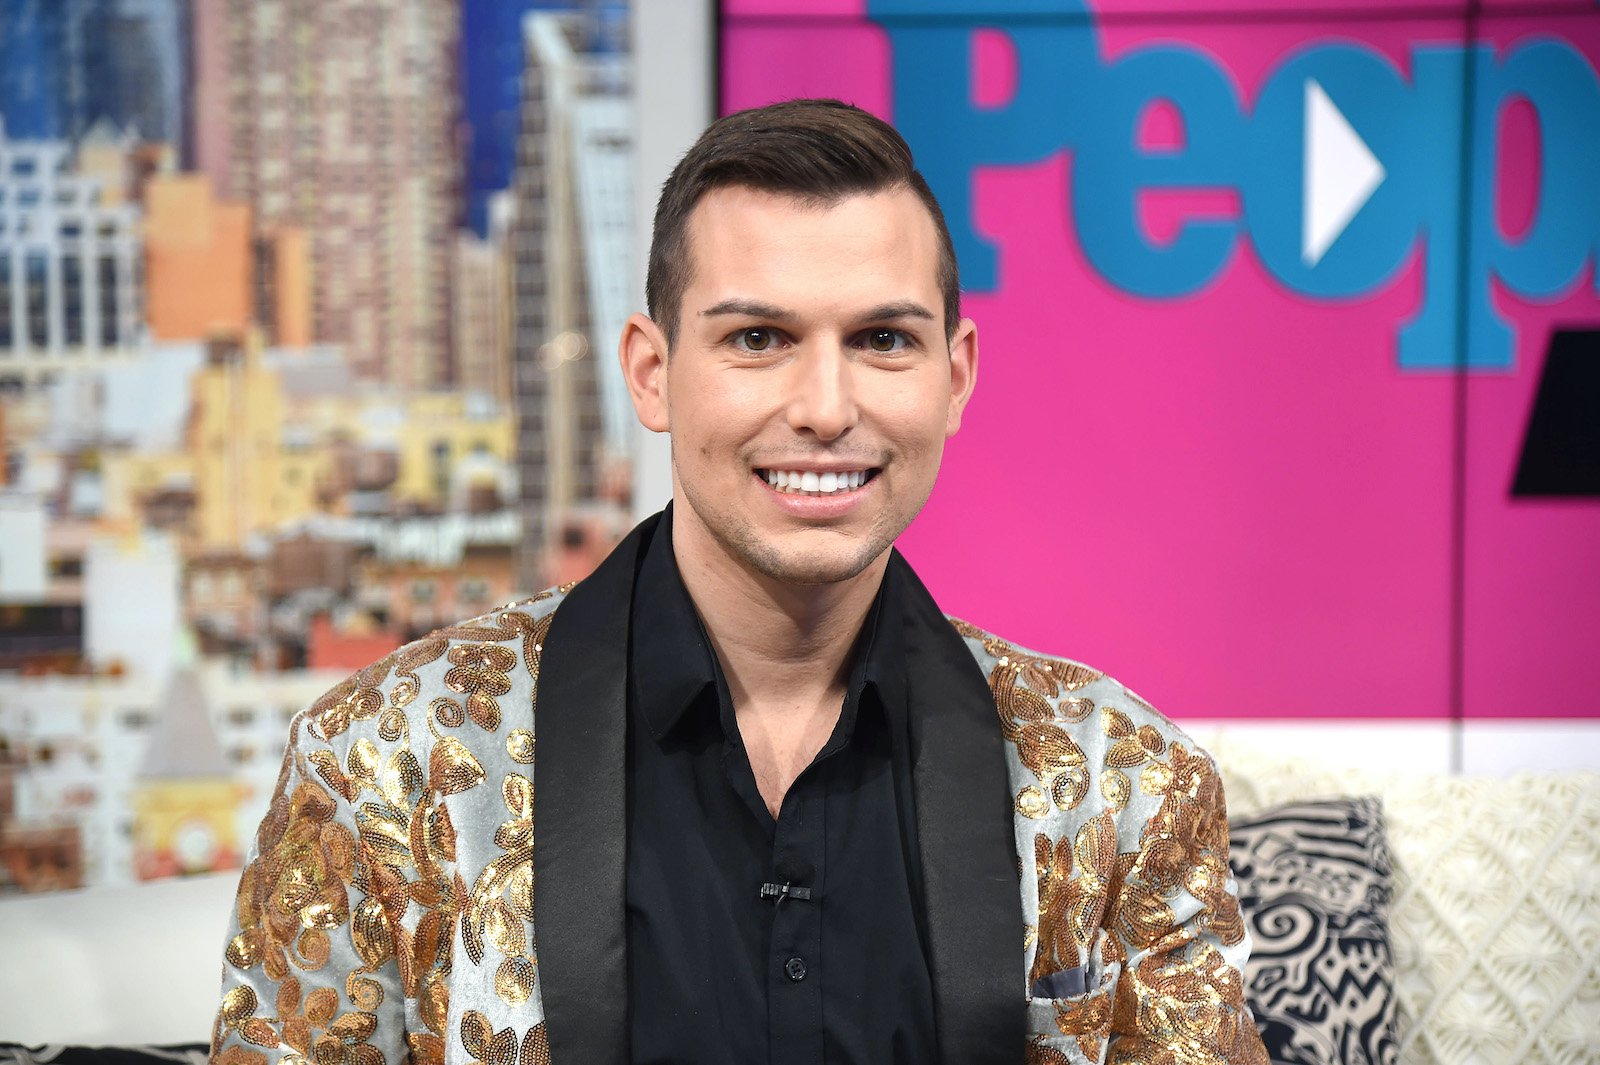 Reality TV star and psychic medium Matt Fraser smiles for the camera wearing a gold and white jacket. 